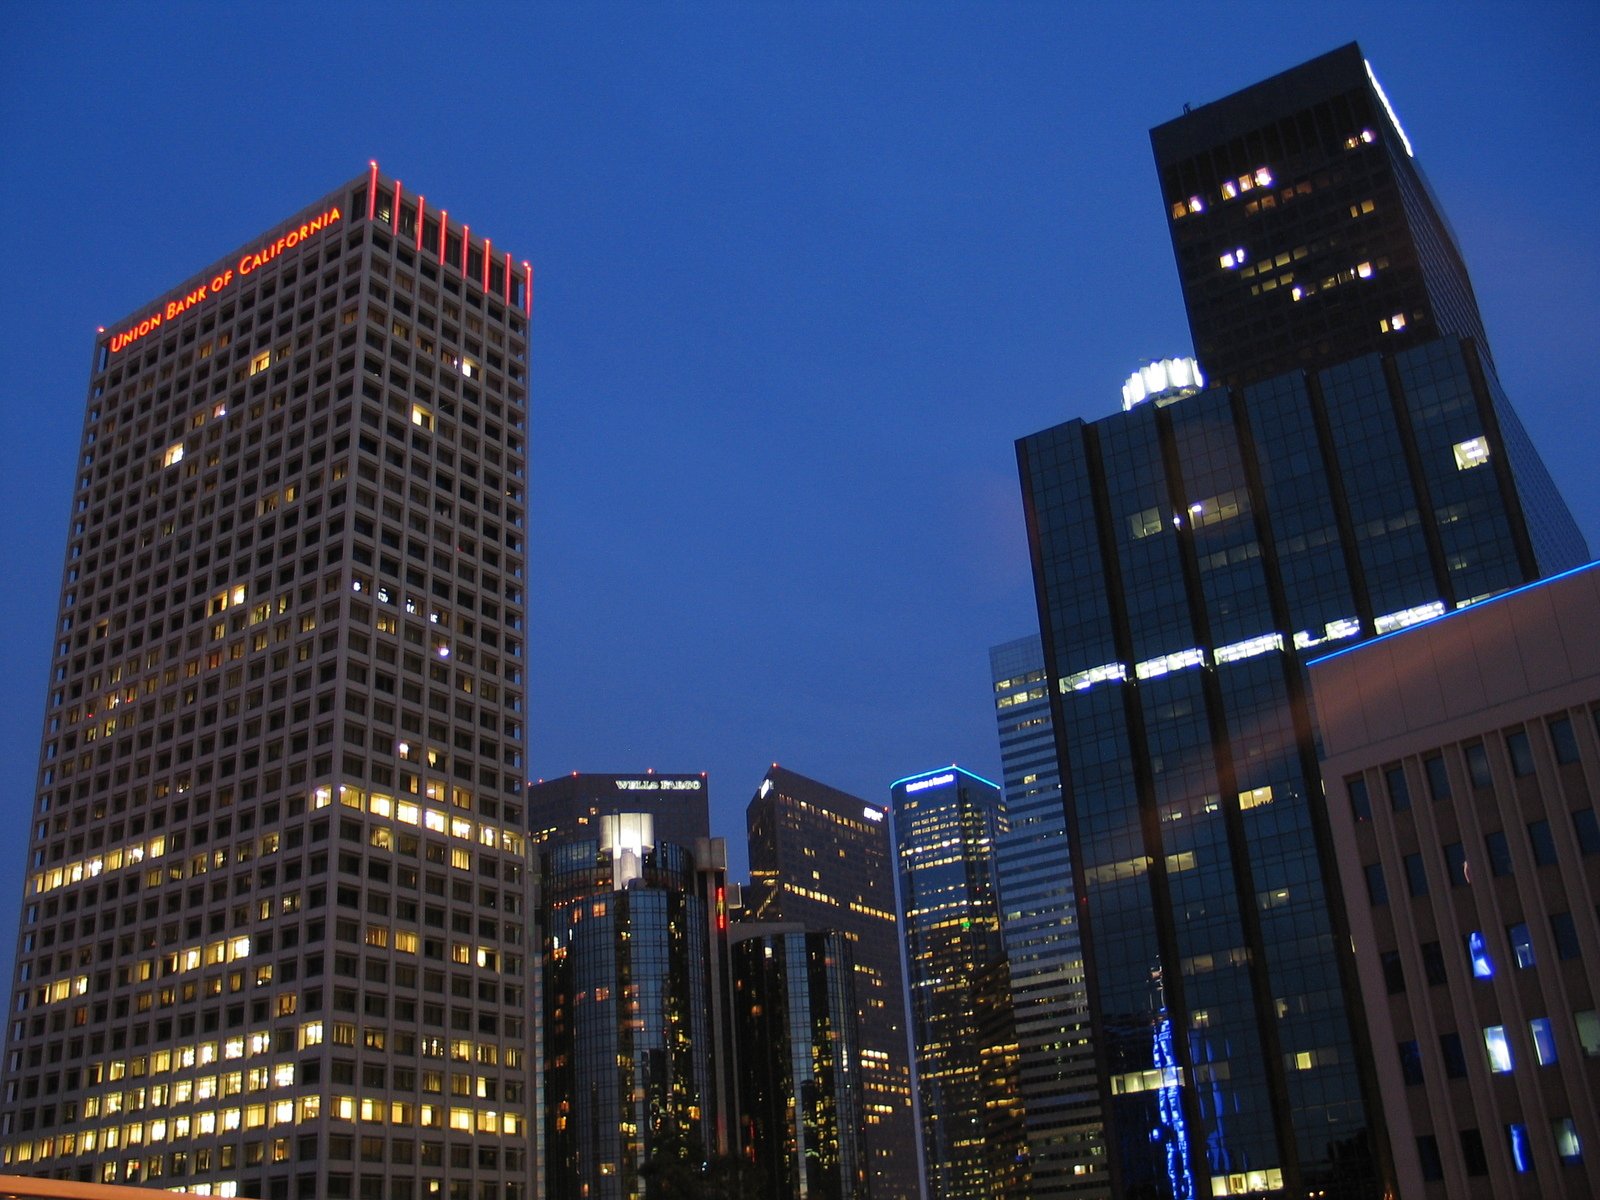 the skyscrs are lit up in different colors and designs